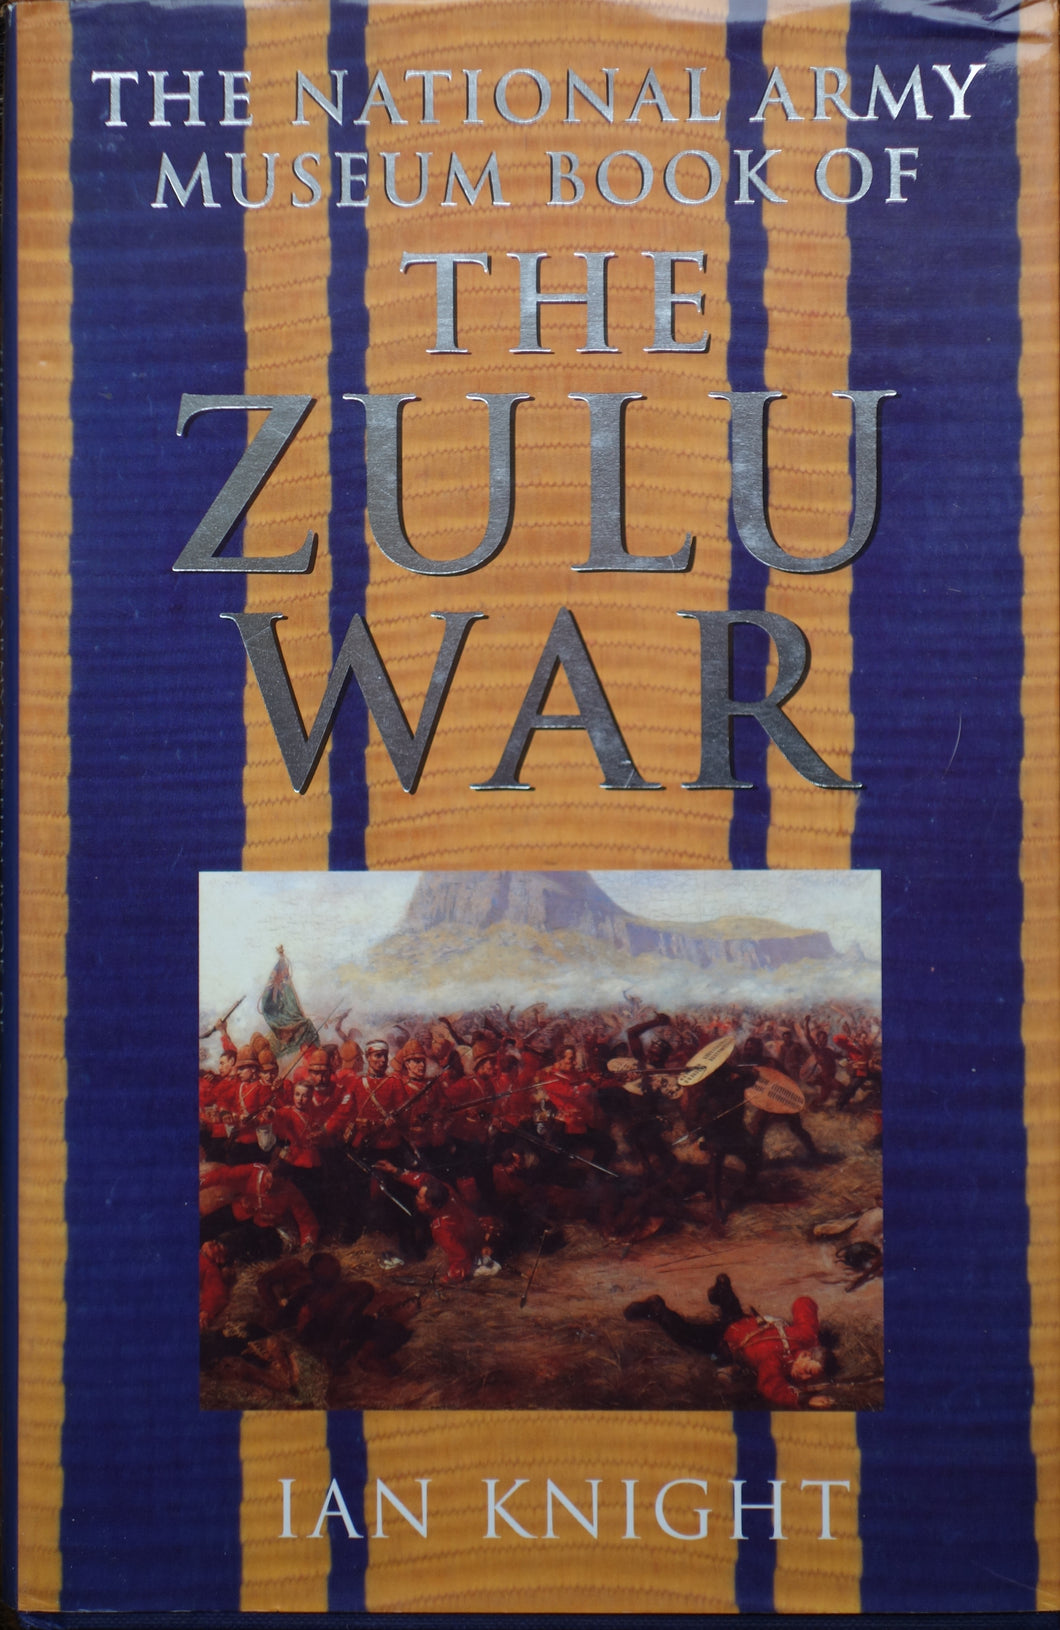 'THE NATIONAL ARMY MUSEUM BOOK OF THE ZULU WAR' by Ian Knight